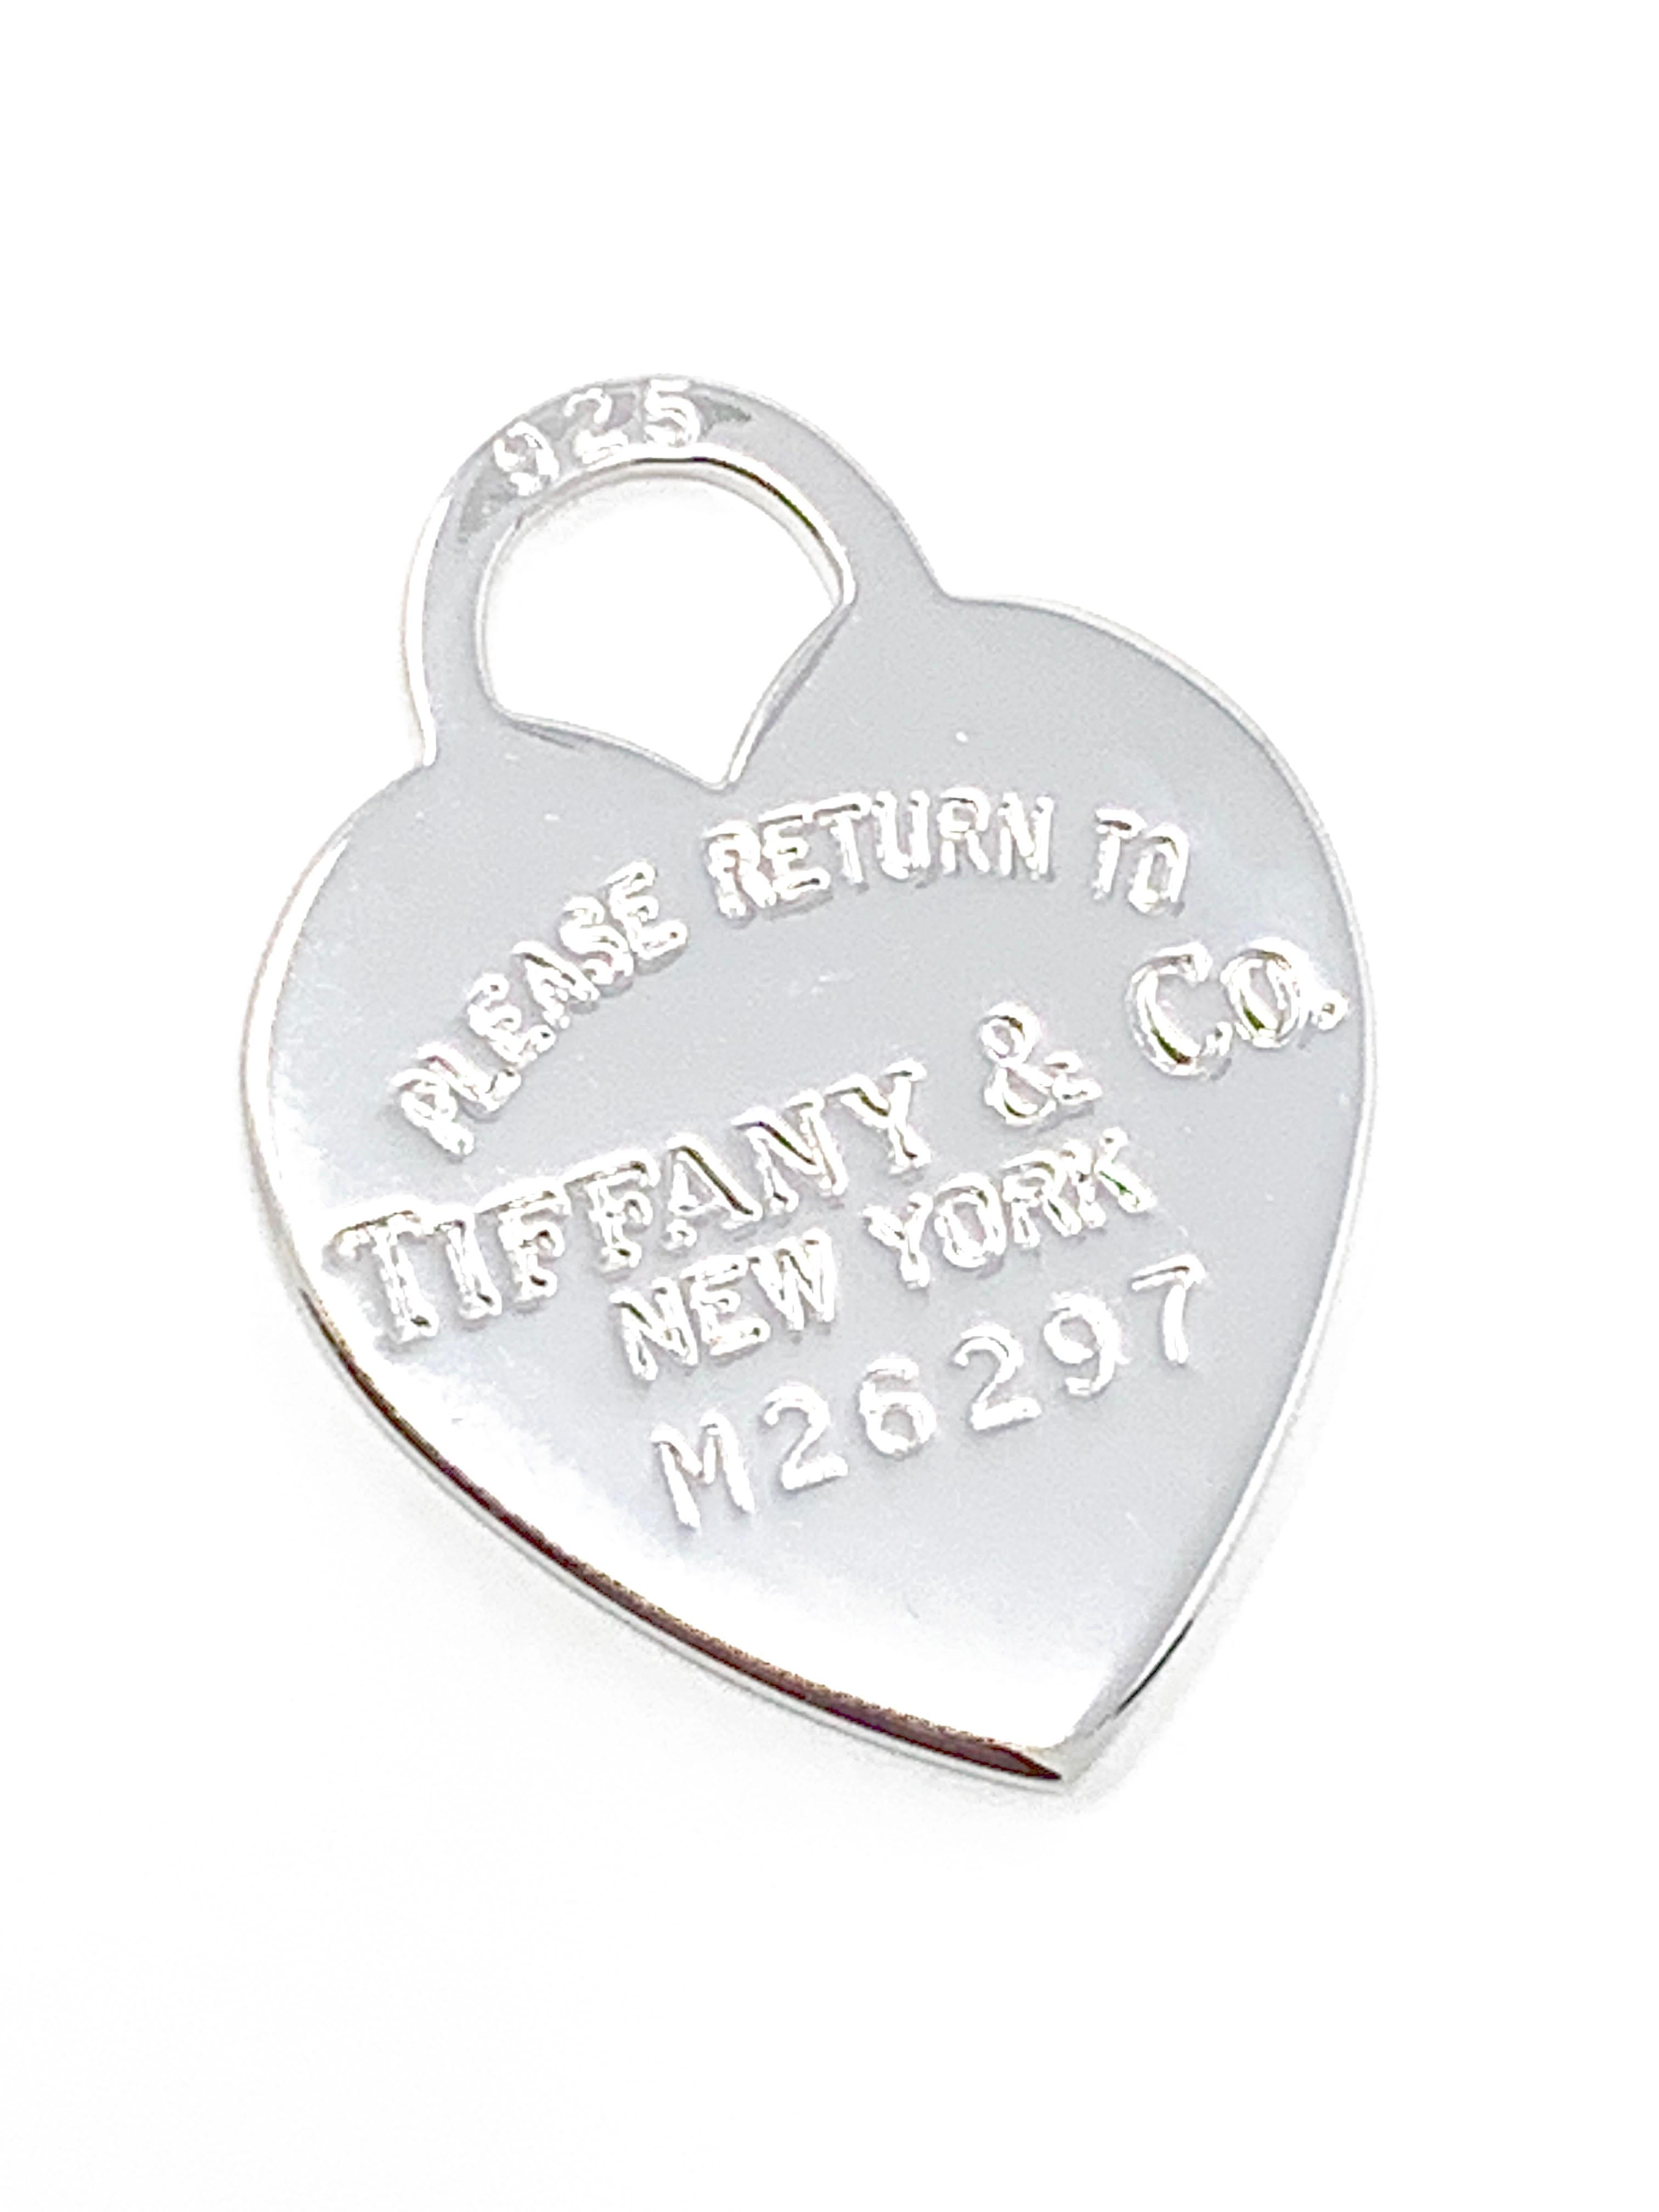 (Item Description) 
Brand - Tiffany&Co.
Gender - Unisex
Condition - Pre-Owned 
Style - Heart Pendant 
Metals - 925 Silver 
Coating - 24k White Gold
Weight - 4.0 Grams
Hall marks - Please Return to /Tiffany&co NY
length -1 Inch Aprox
Tiffany Jewelry